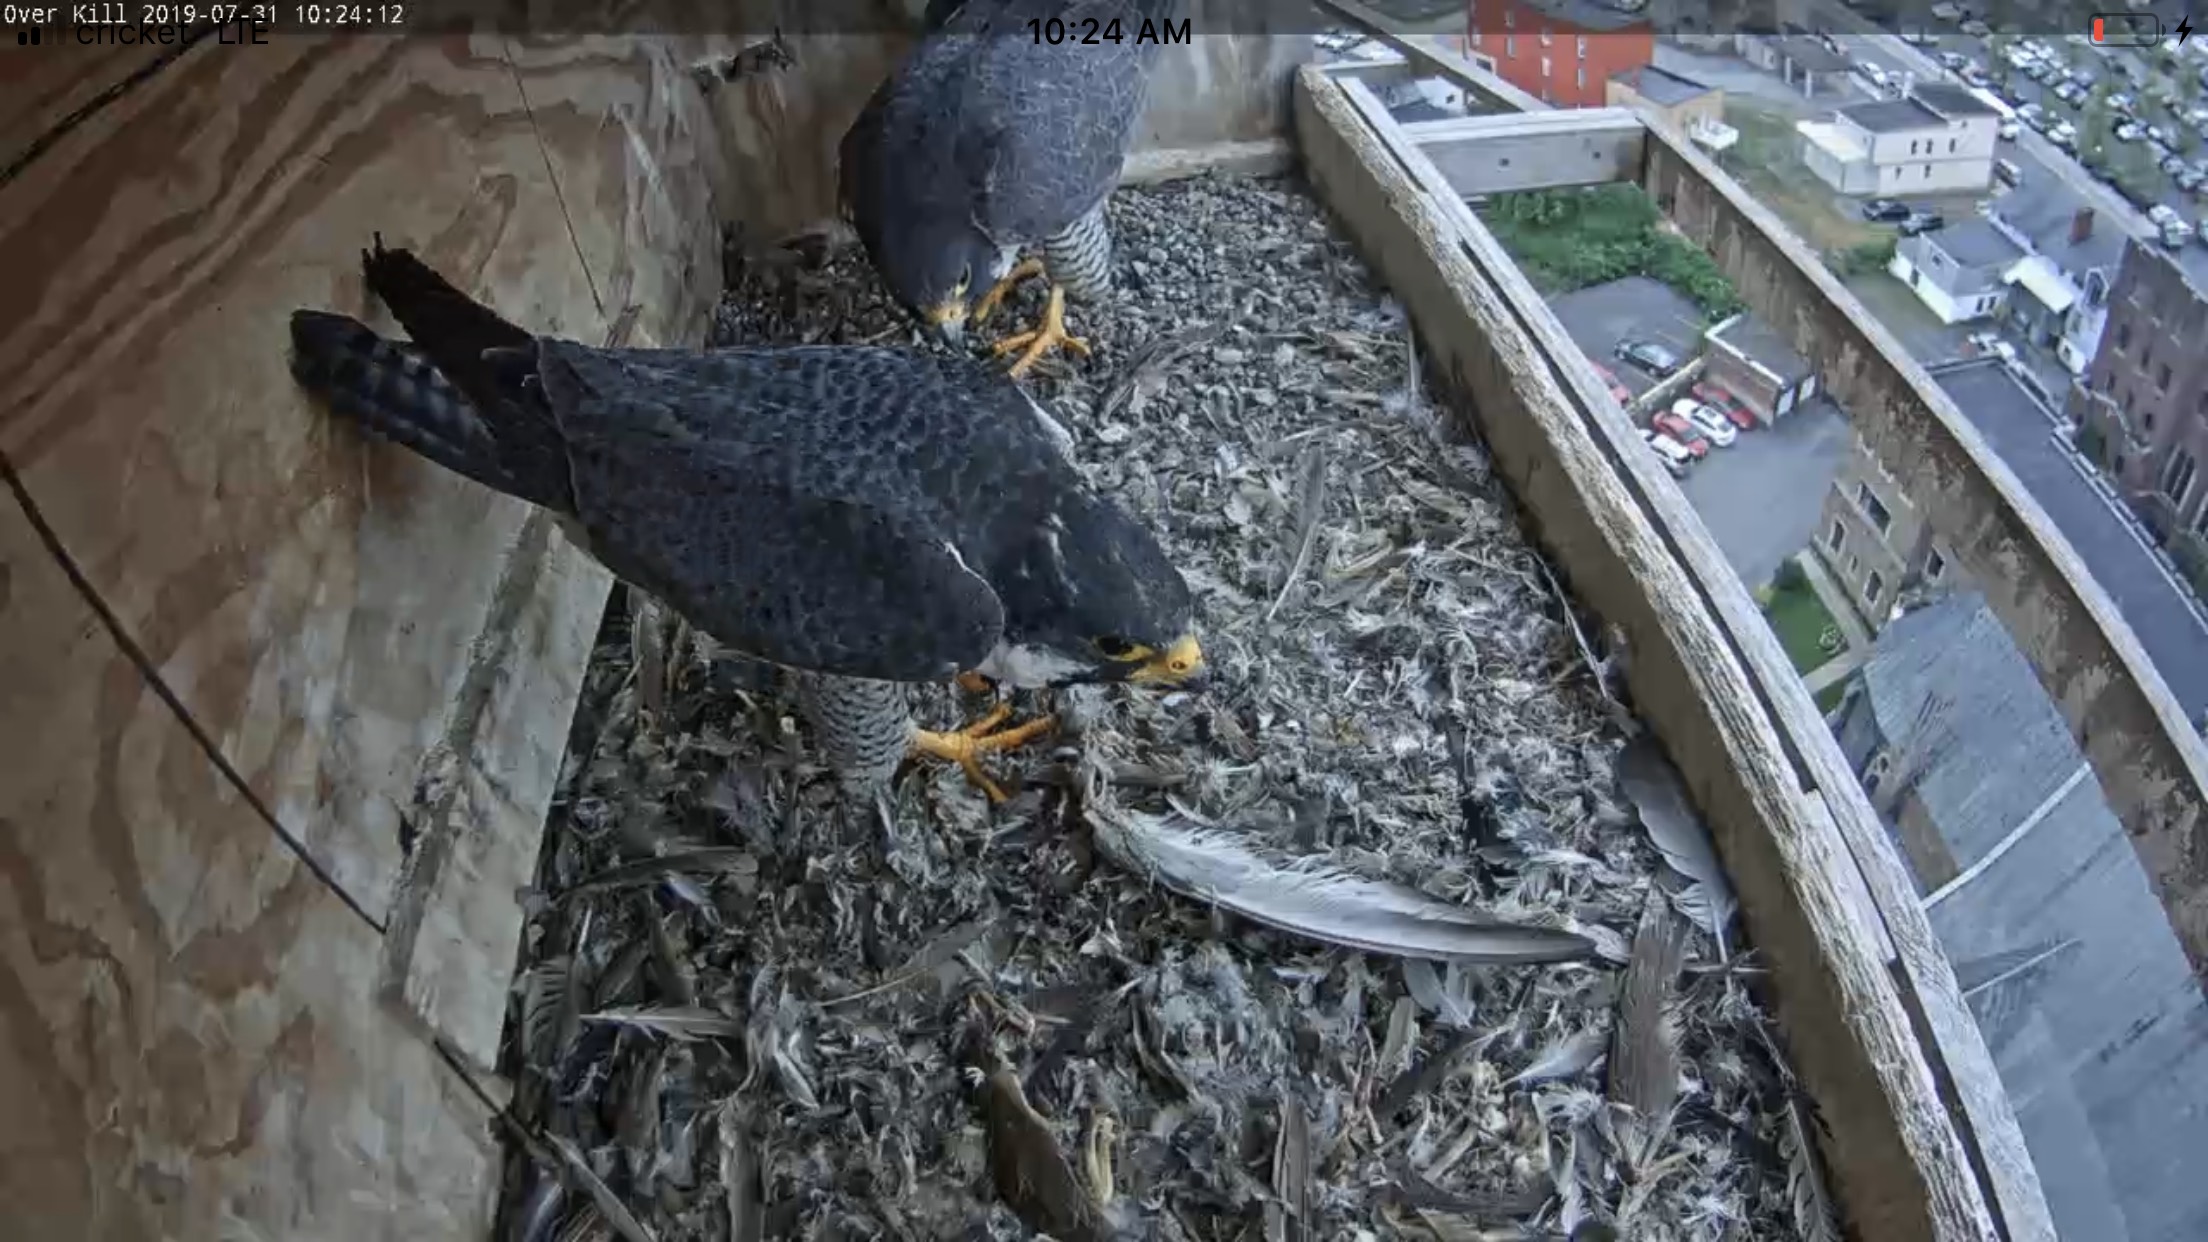 Astrid and Ares resume their ledge displays at the nest box